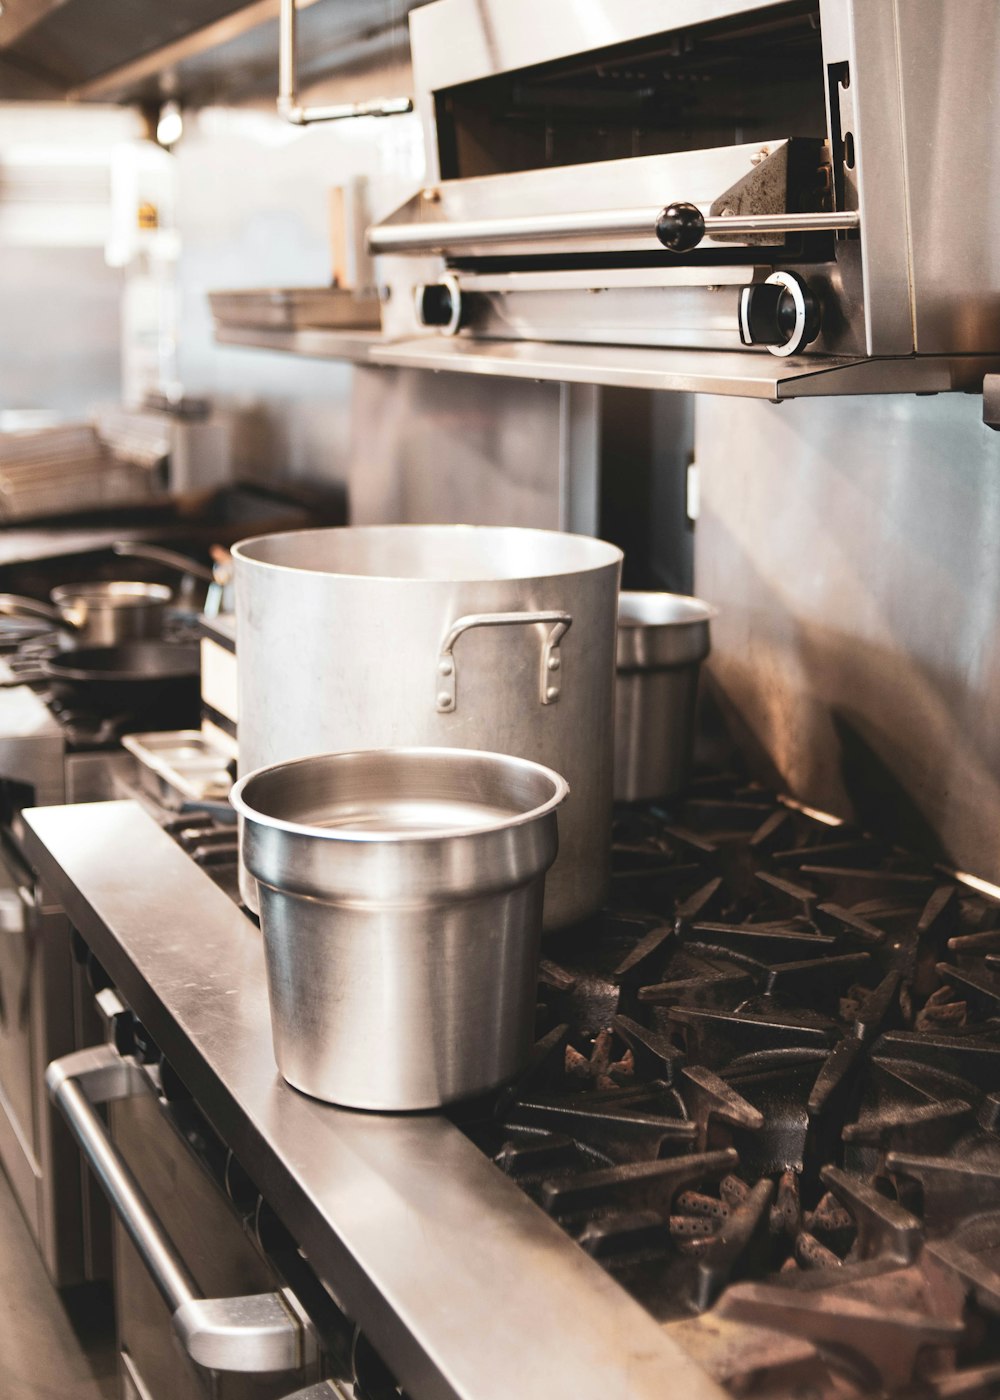 stainless steel stock pots on stove